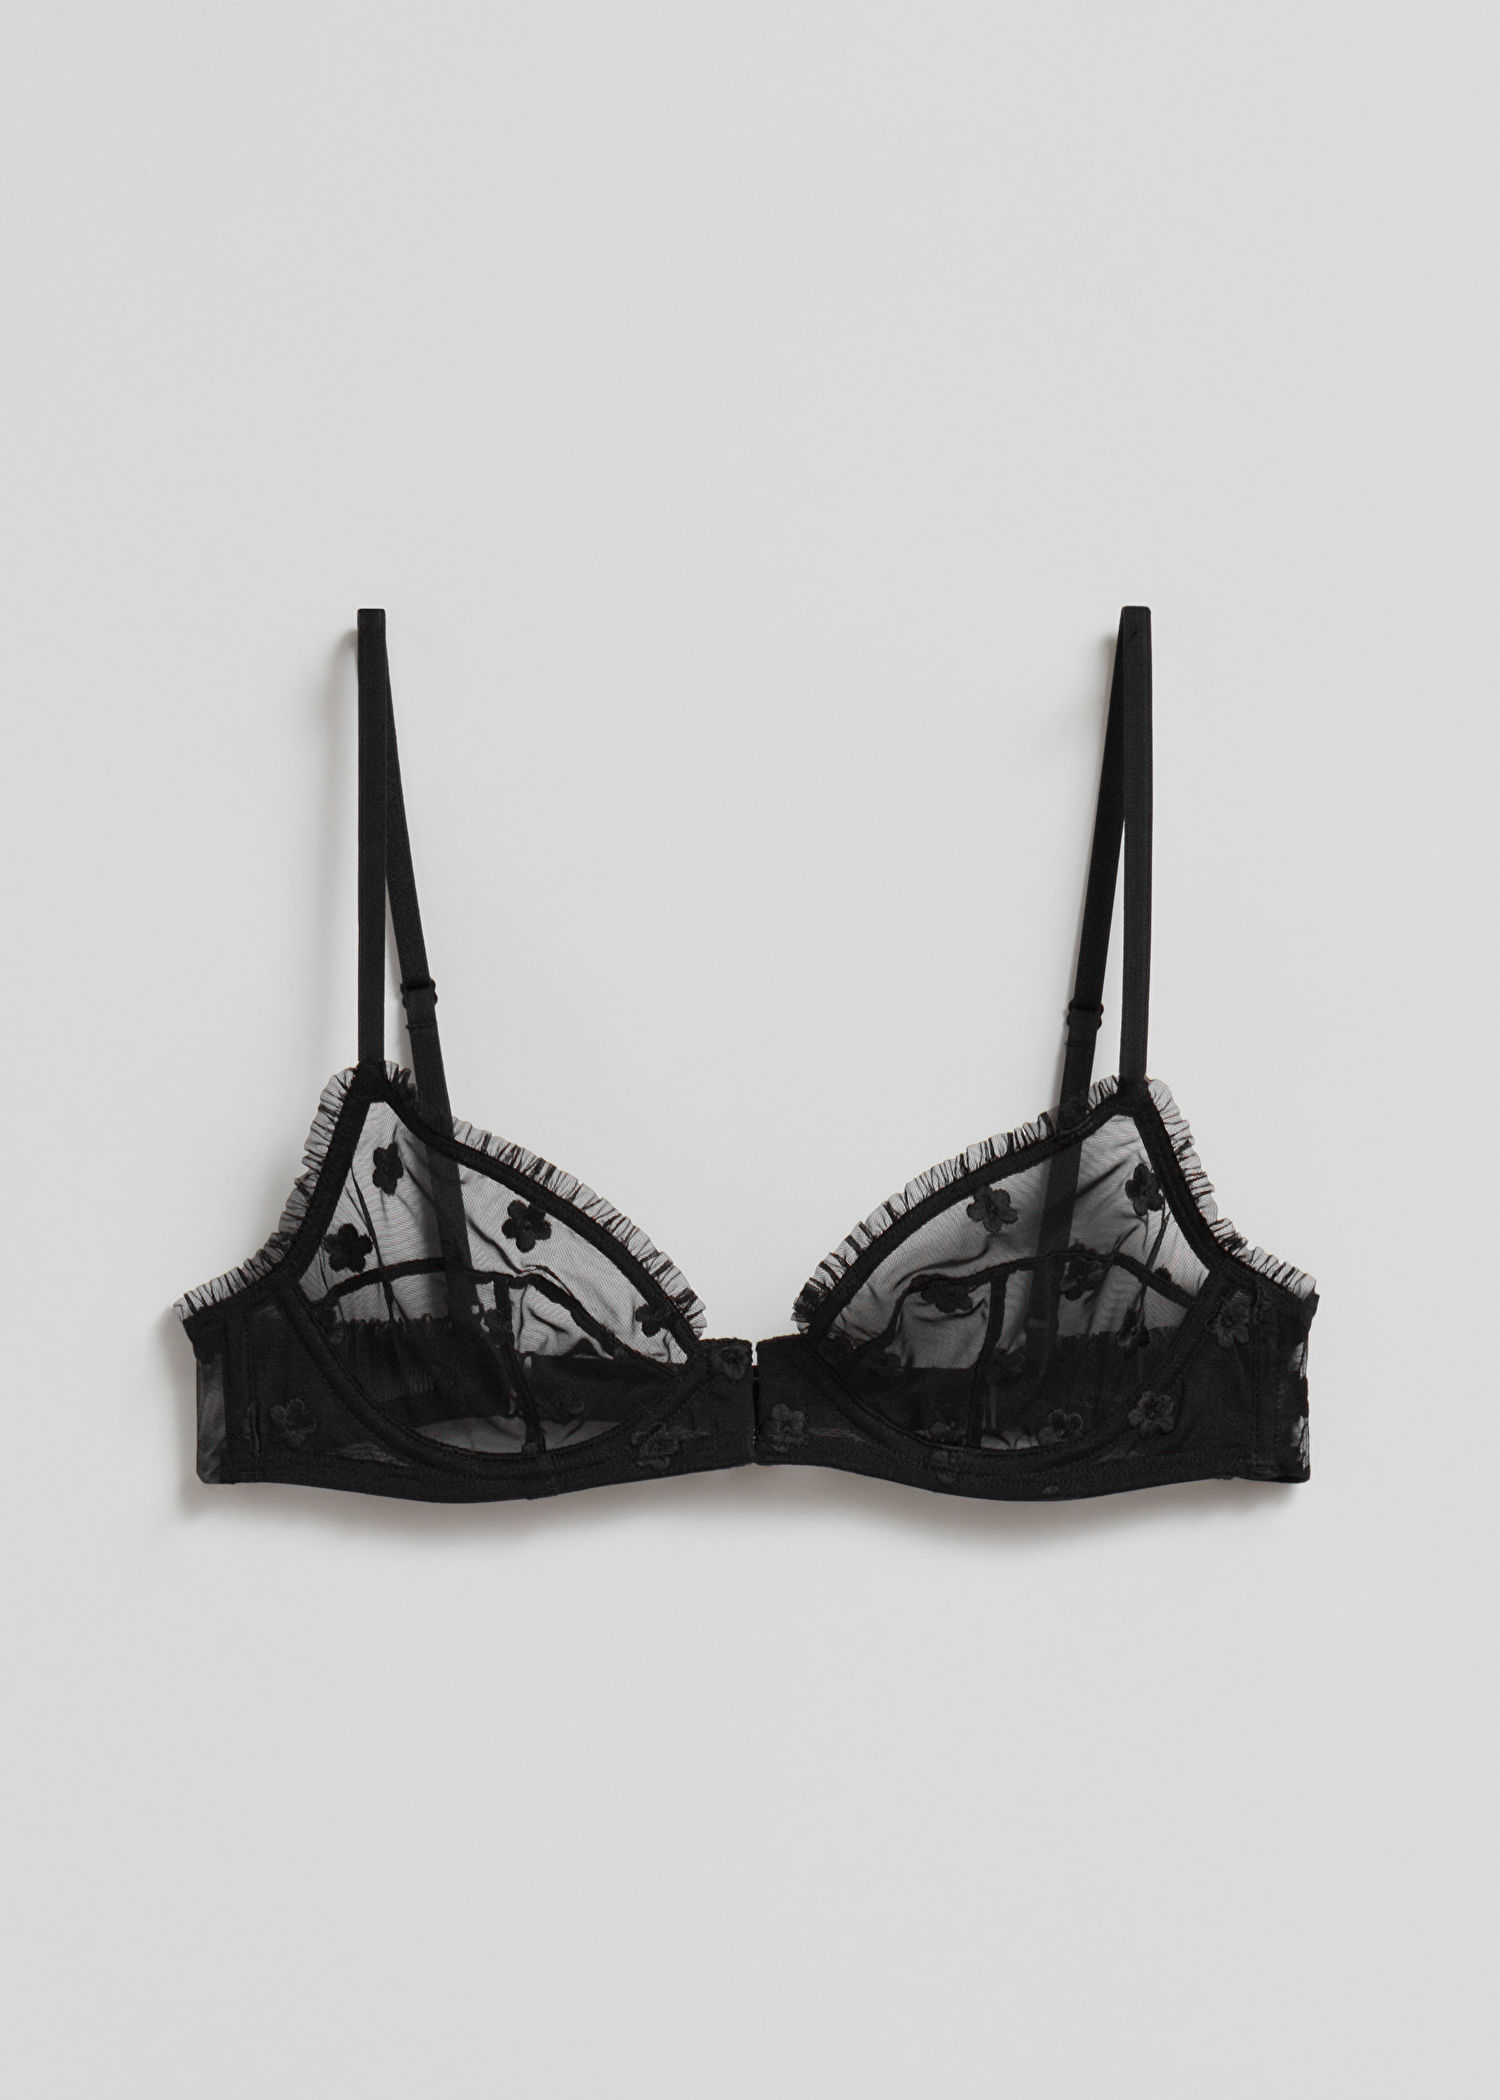 & Other Stories + Frilled Sheer Underwire Bra